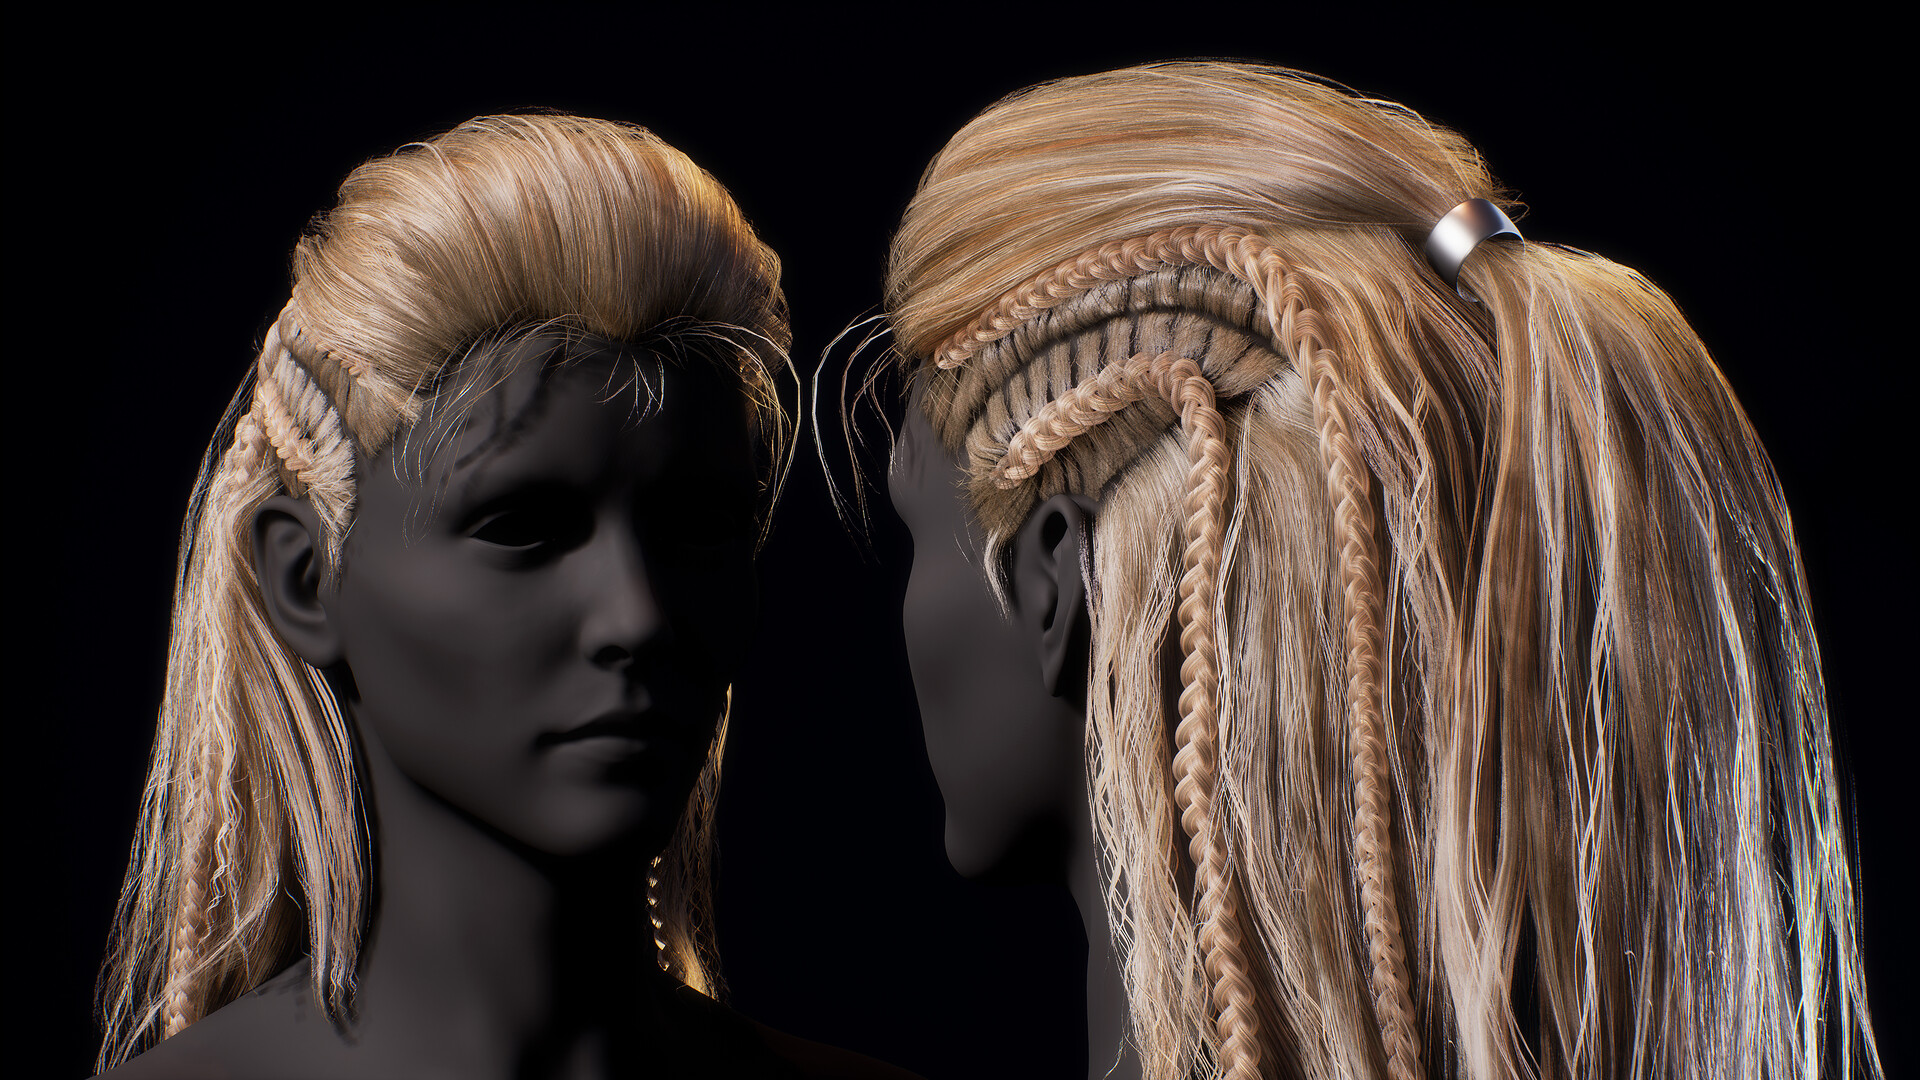 Vikings: 10 Coolest Hairstyles For Women